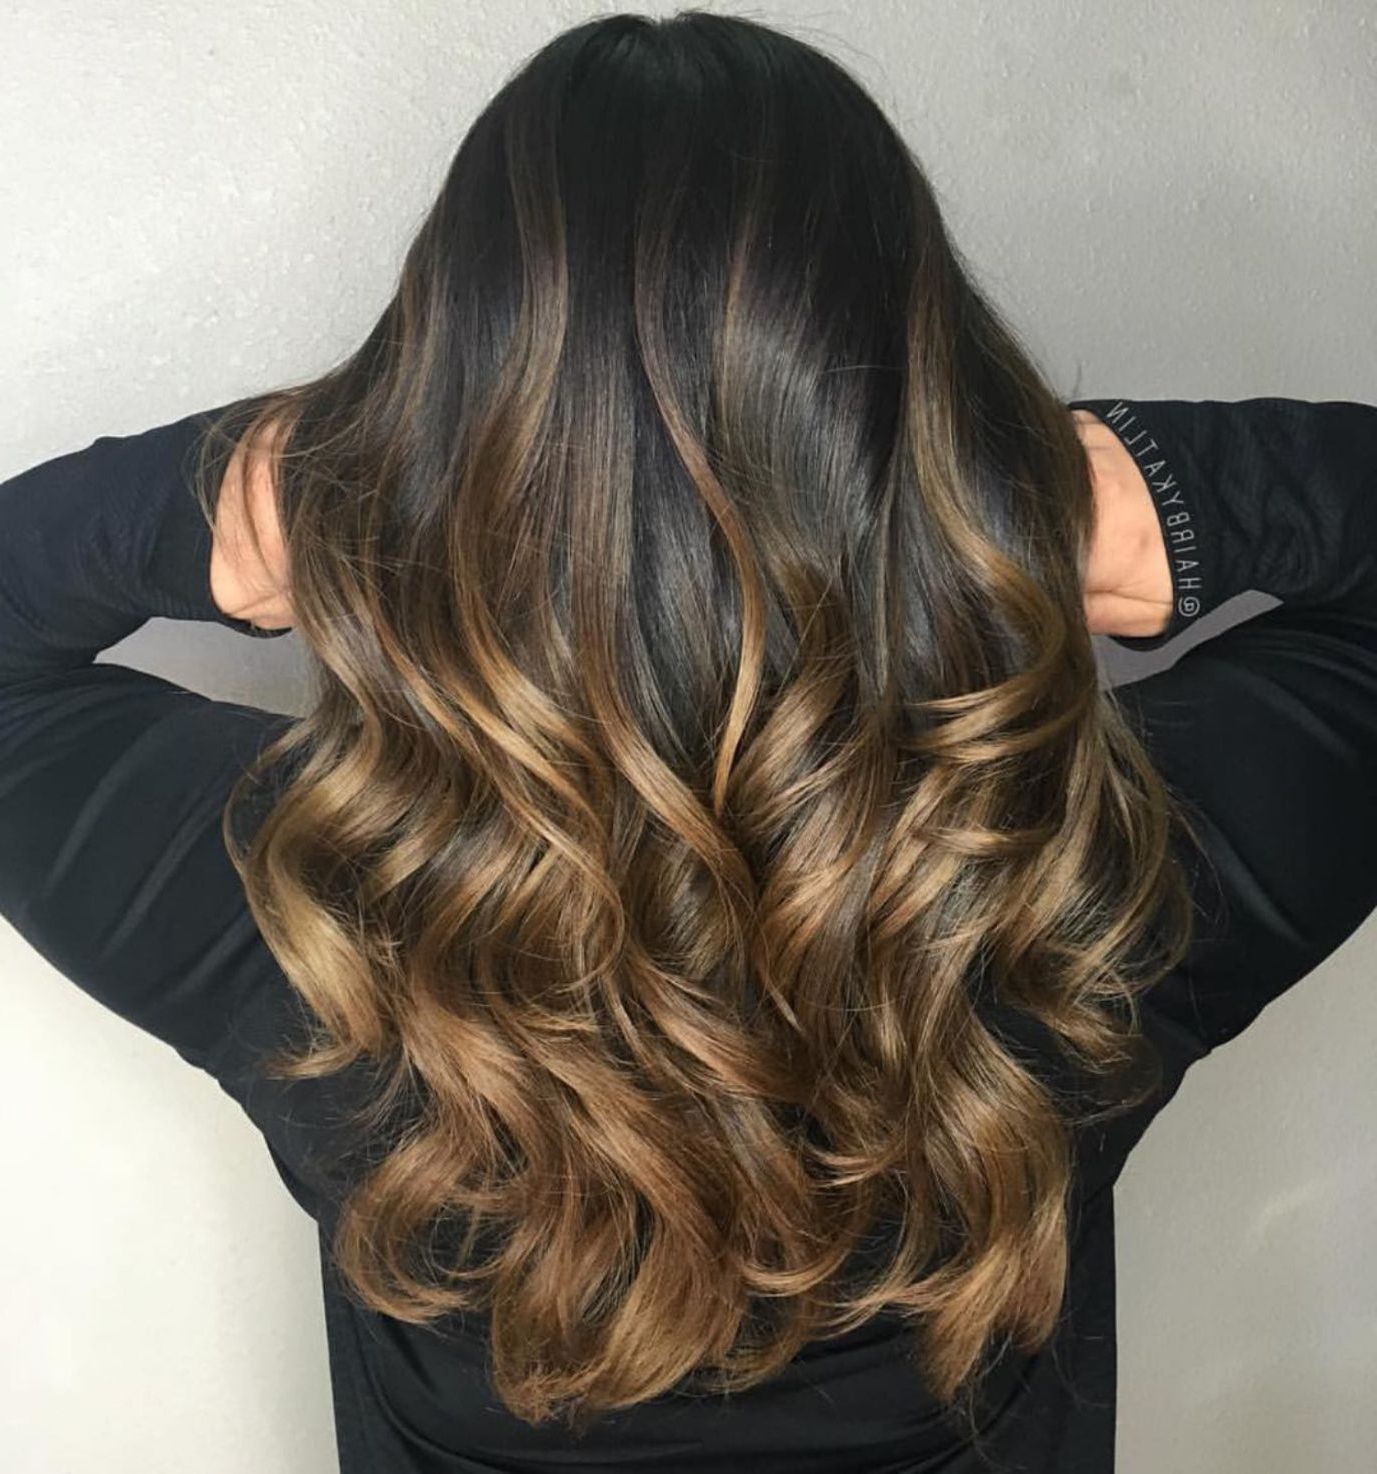 Preferred Long Layered Ombre Hairstyles Inside Fashion : Brunette Ombre Hair Appealing 80 Cute Layered Hairstyles (View 15 of 20)